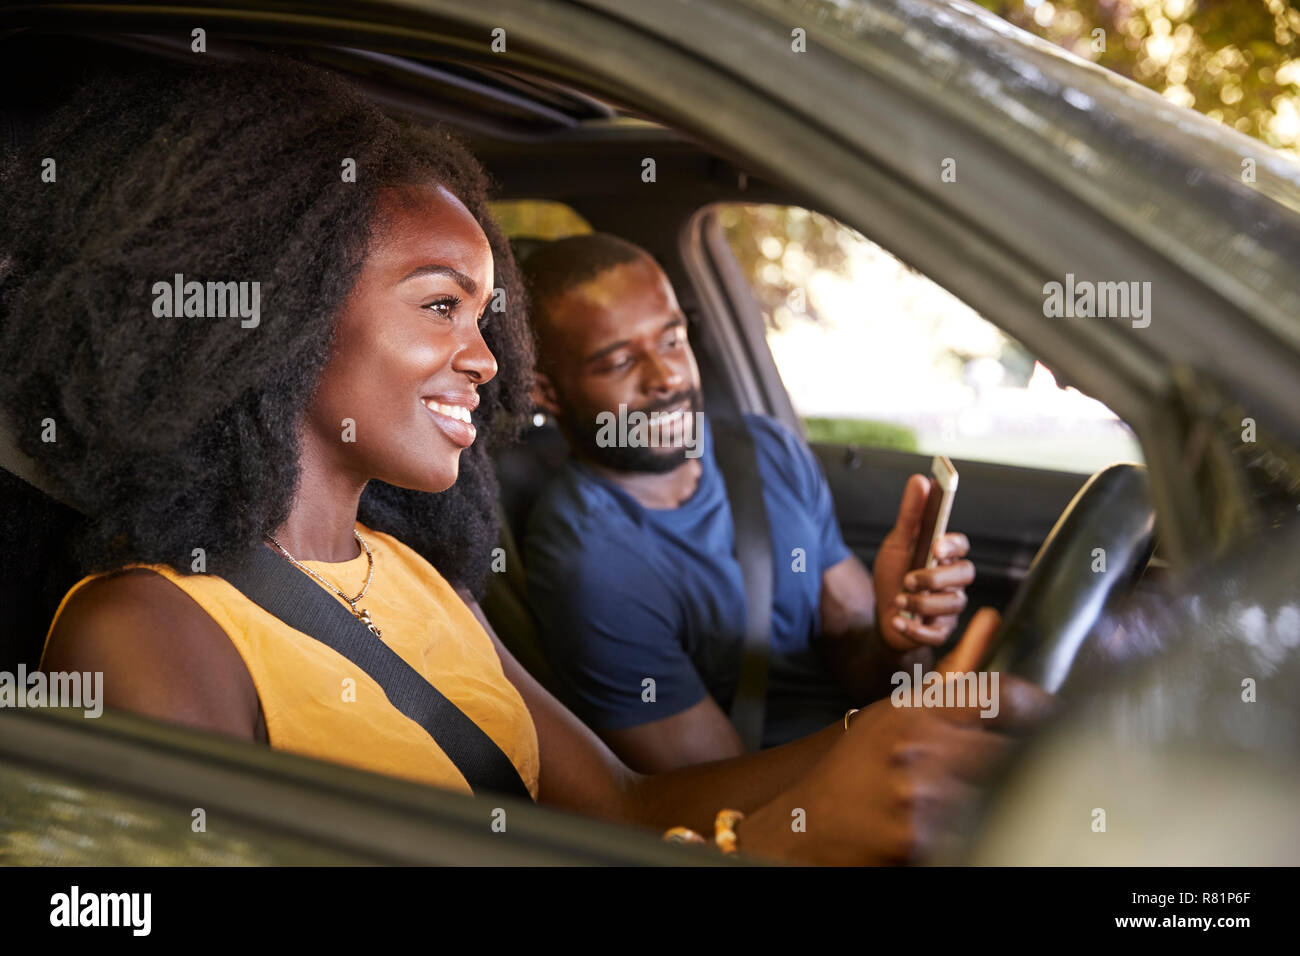 A young black man checks smartphone during a road trip Stock Photo